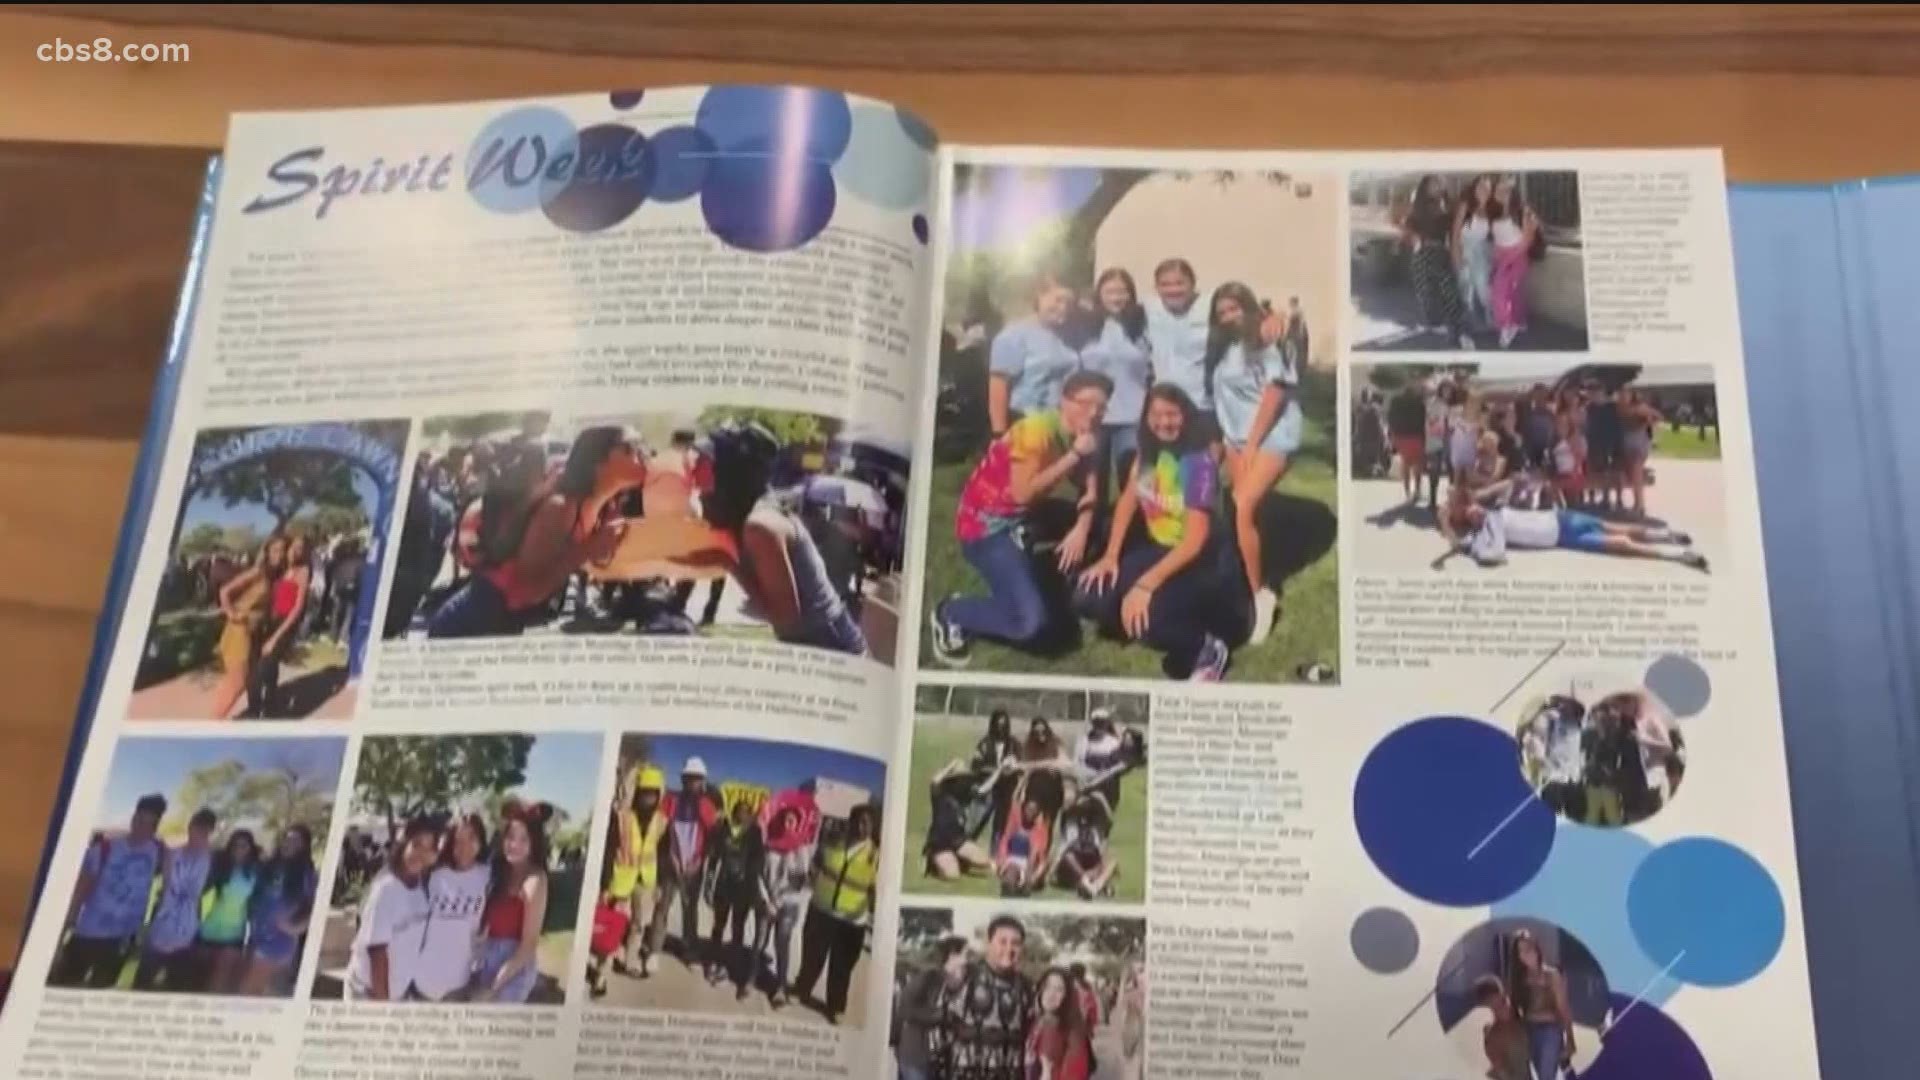 Otay Ranch High School yearbook students are getting creative and feeling the pressure of building a yearbook when campus life is off-campus.